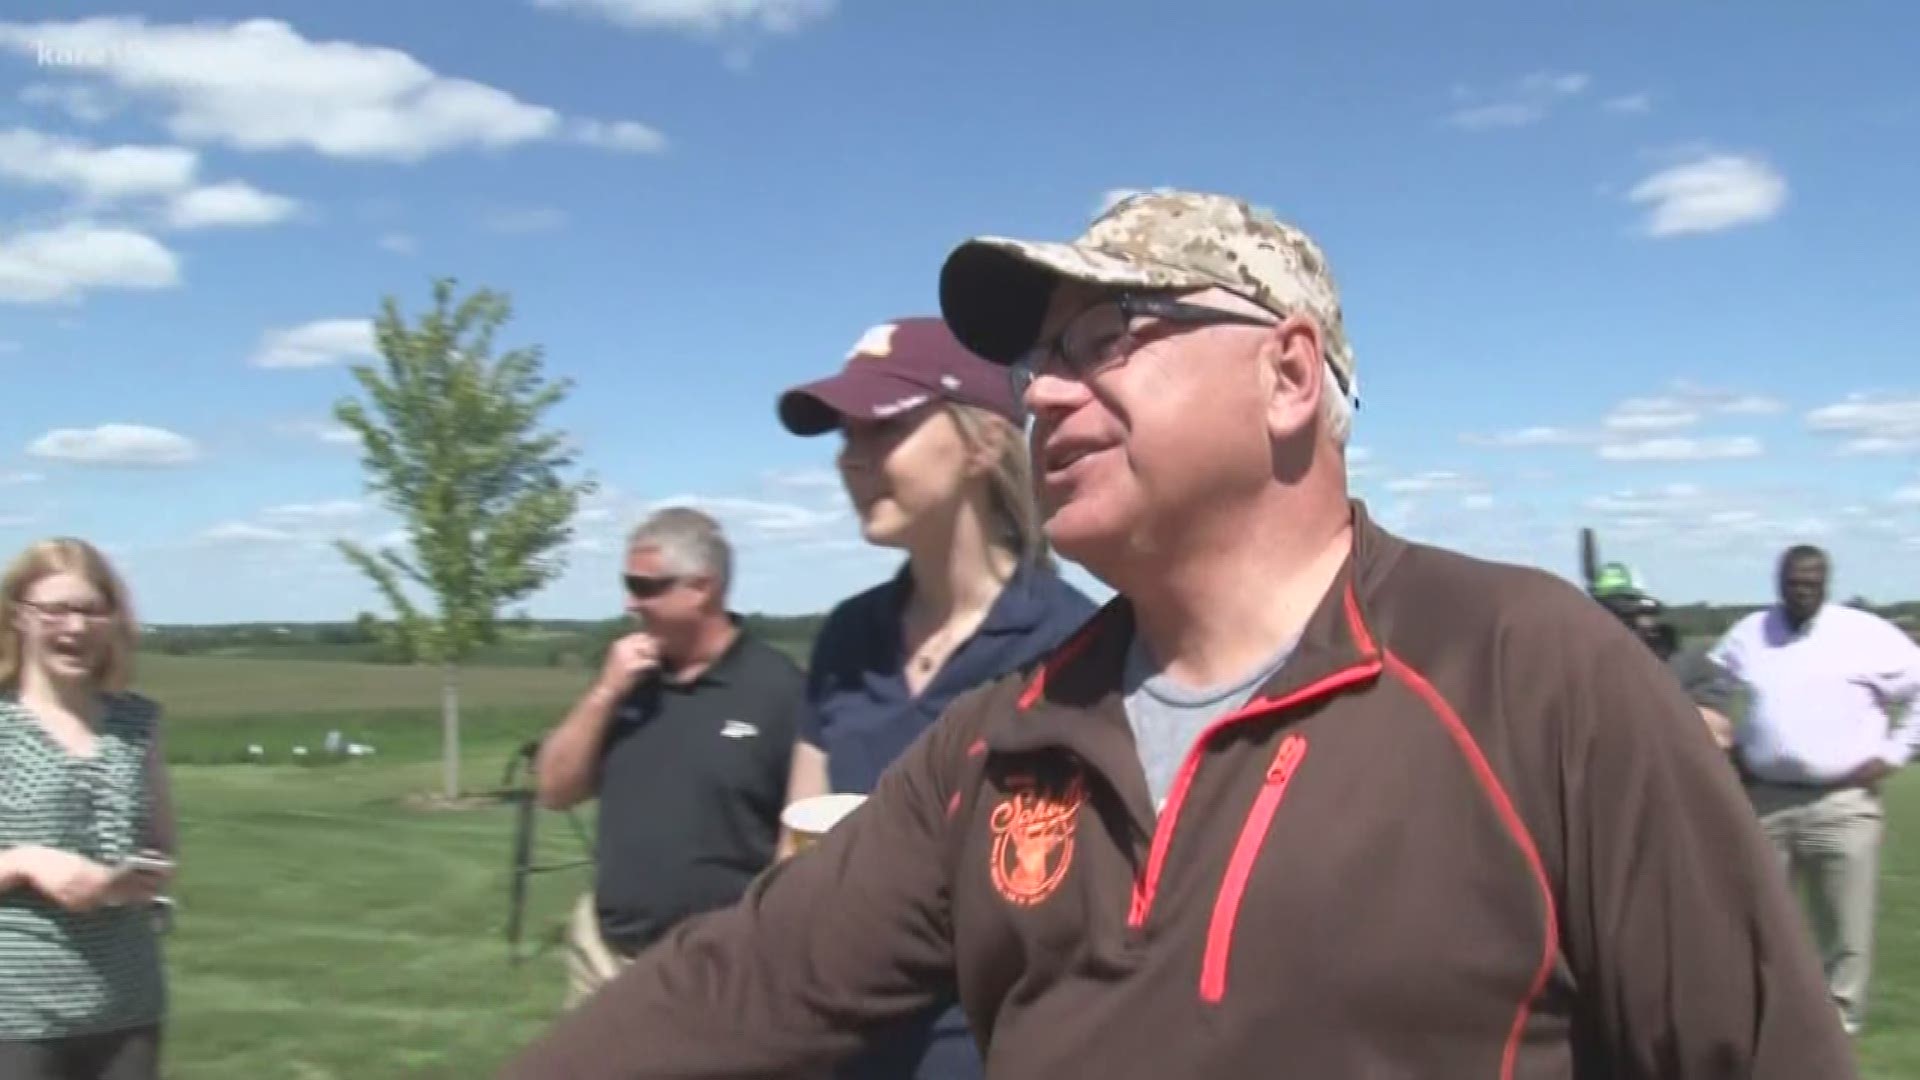 Governor Tim Walz visits a hemp farm in Hastings. He is checking in on how the industry is growing.